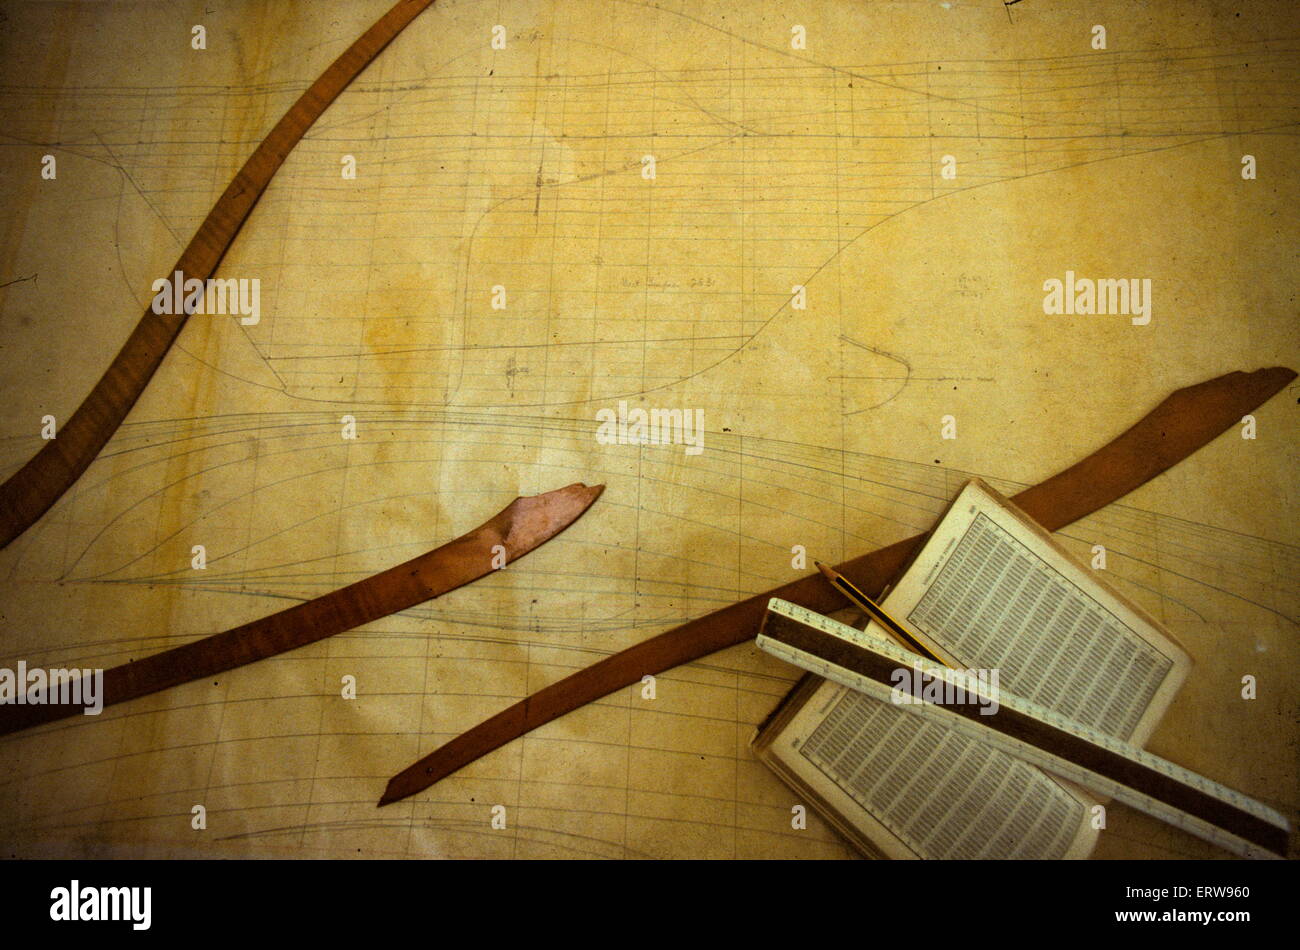 AJAX NEWS PHOTOS - 1987. GLASGOW, SCOTLAND. - SAILING HISTORY - 1881 DRAWING INSTRUMENTS, WOODEN SWEEPS AND TABLES USED BY NAVAL ARCHITECT GEORGE LENNOX WATSON LYING ON LINES PLAN OF THE YACHT BRITANNIA. PHOTO:JONATHAN EASTLAND/AJAX REF:HD/ 21501/1/55 Stock Photo